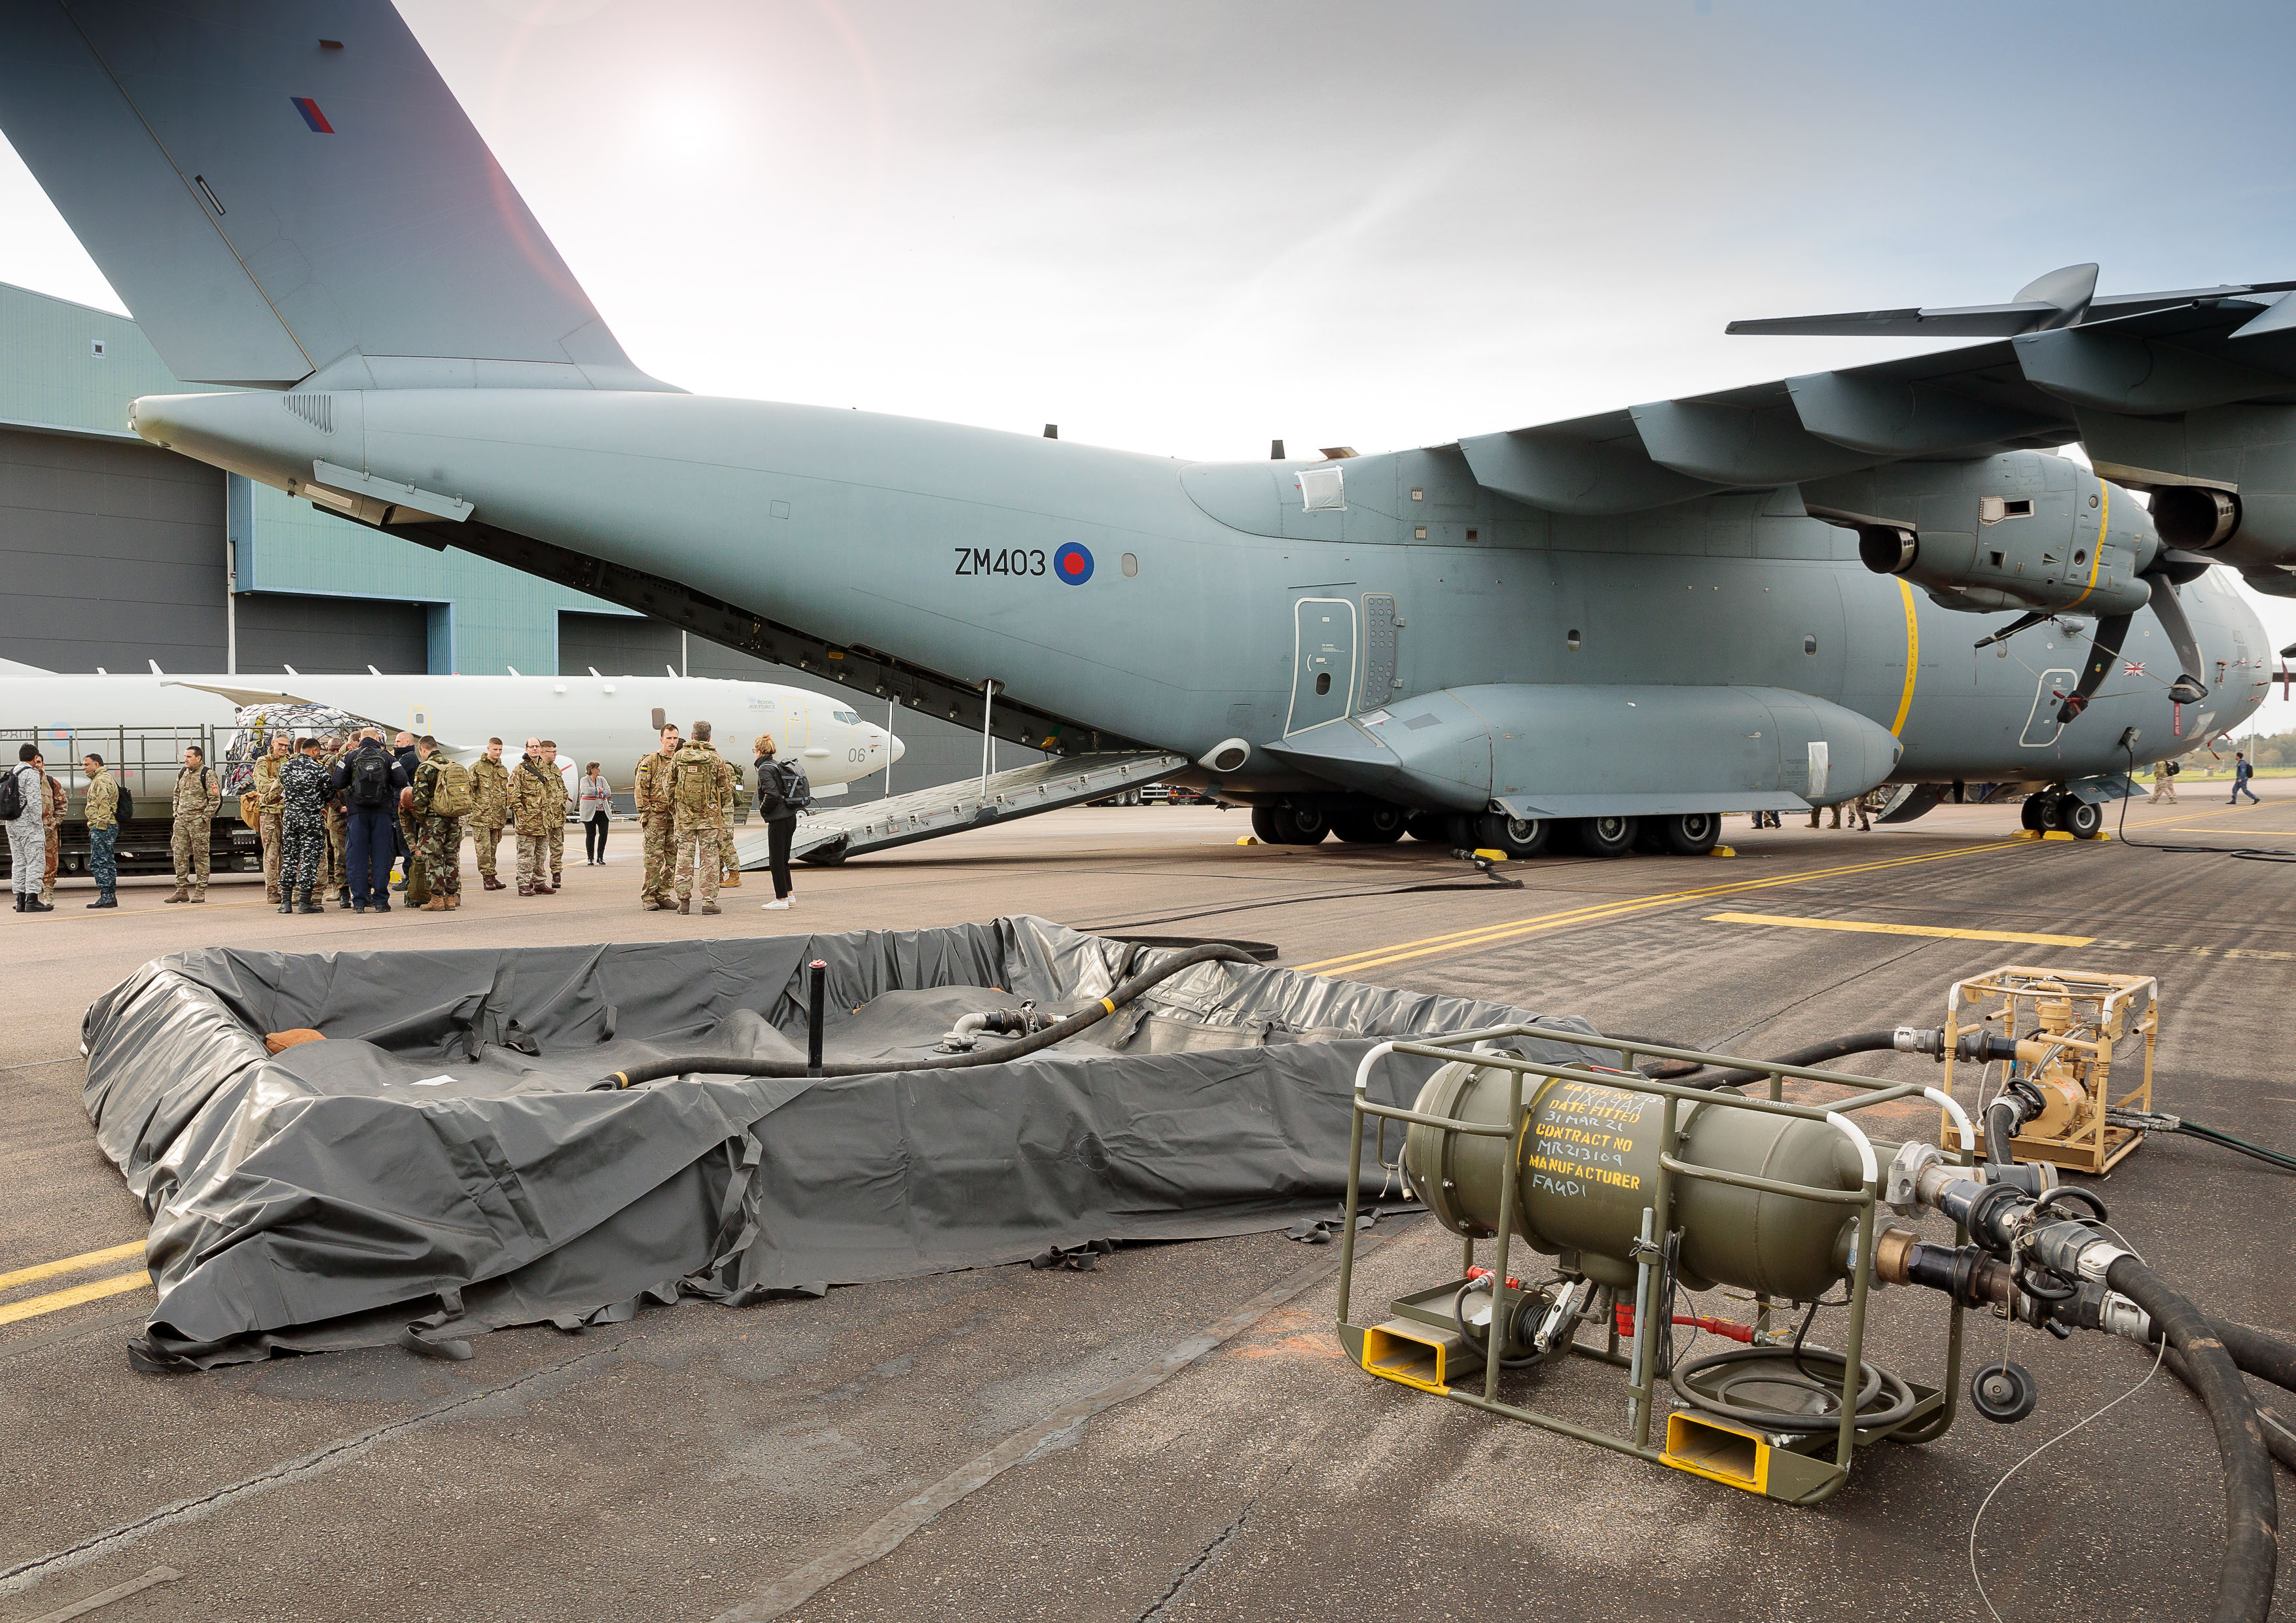 Image shows RAF Poseidon on the airfield with RAF aviators, refuelling tanks, and spills kit.